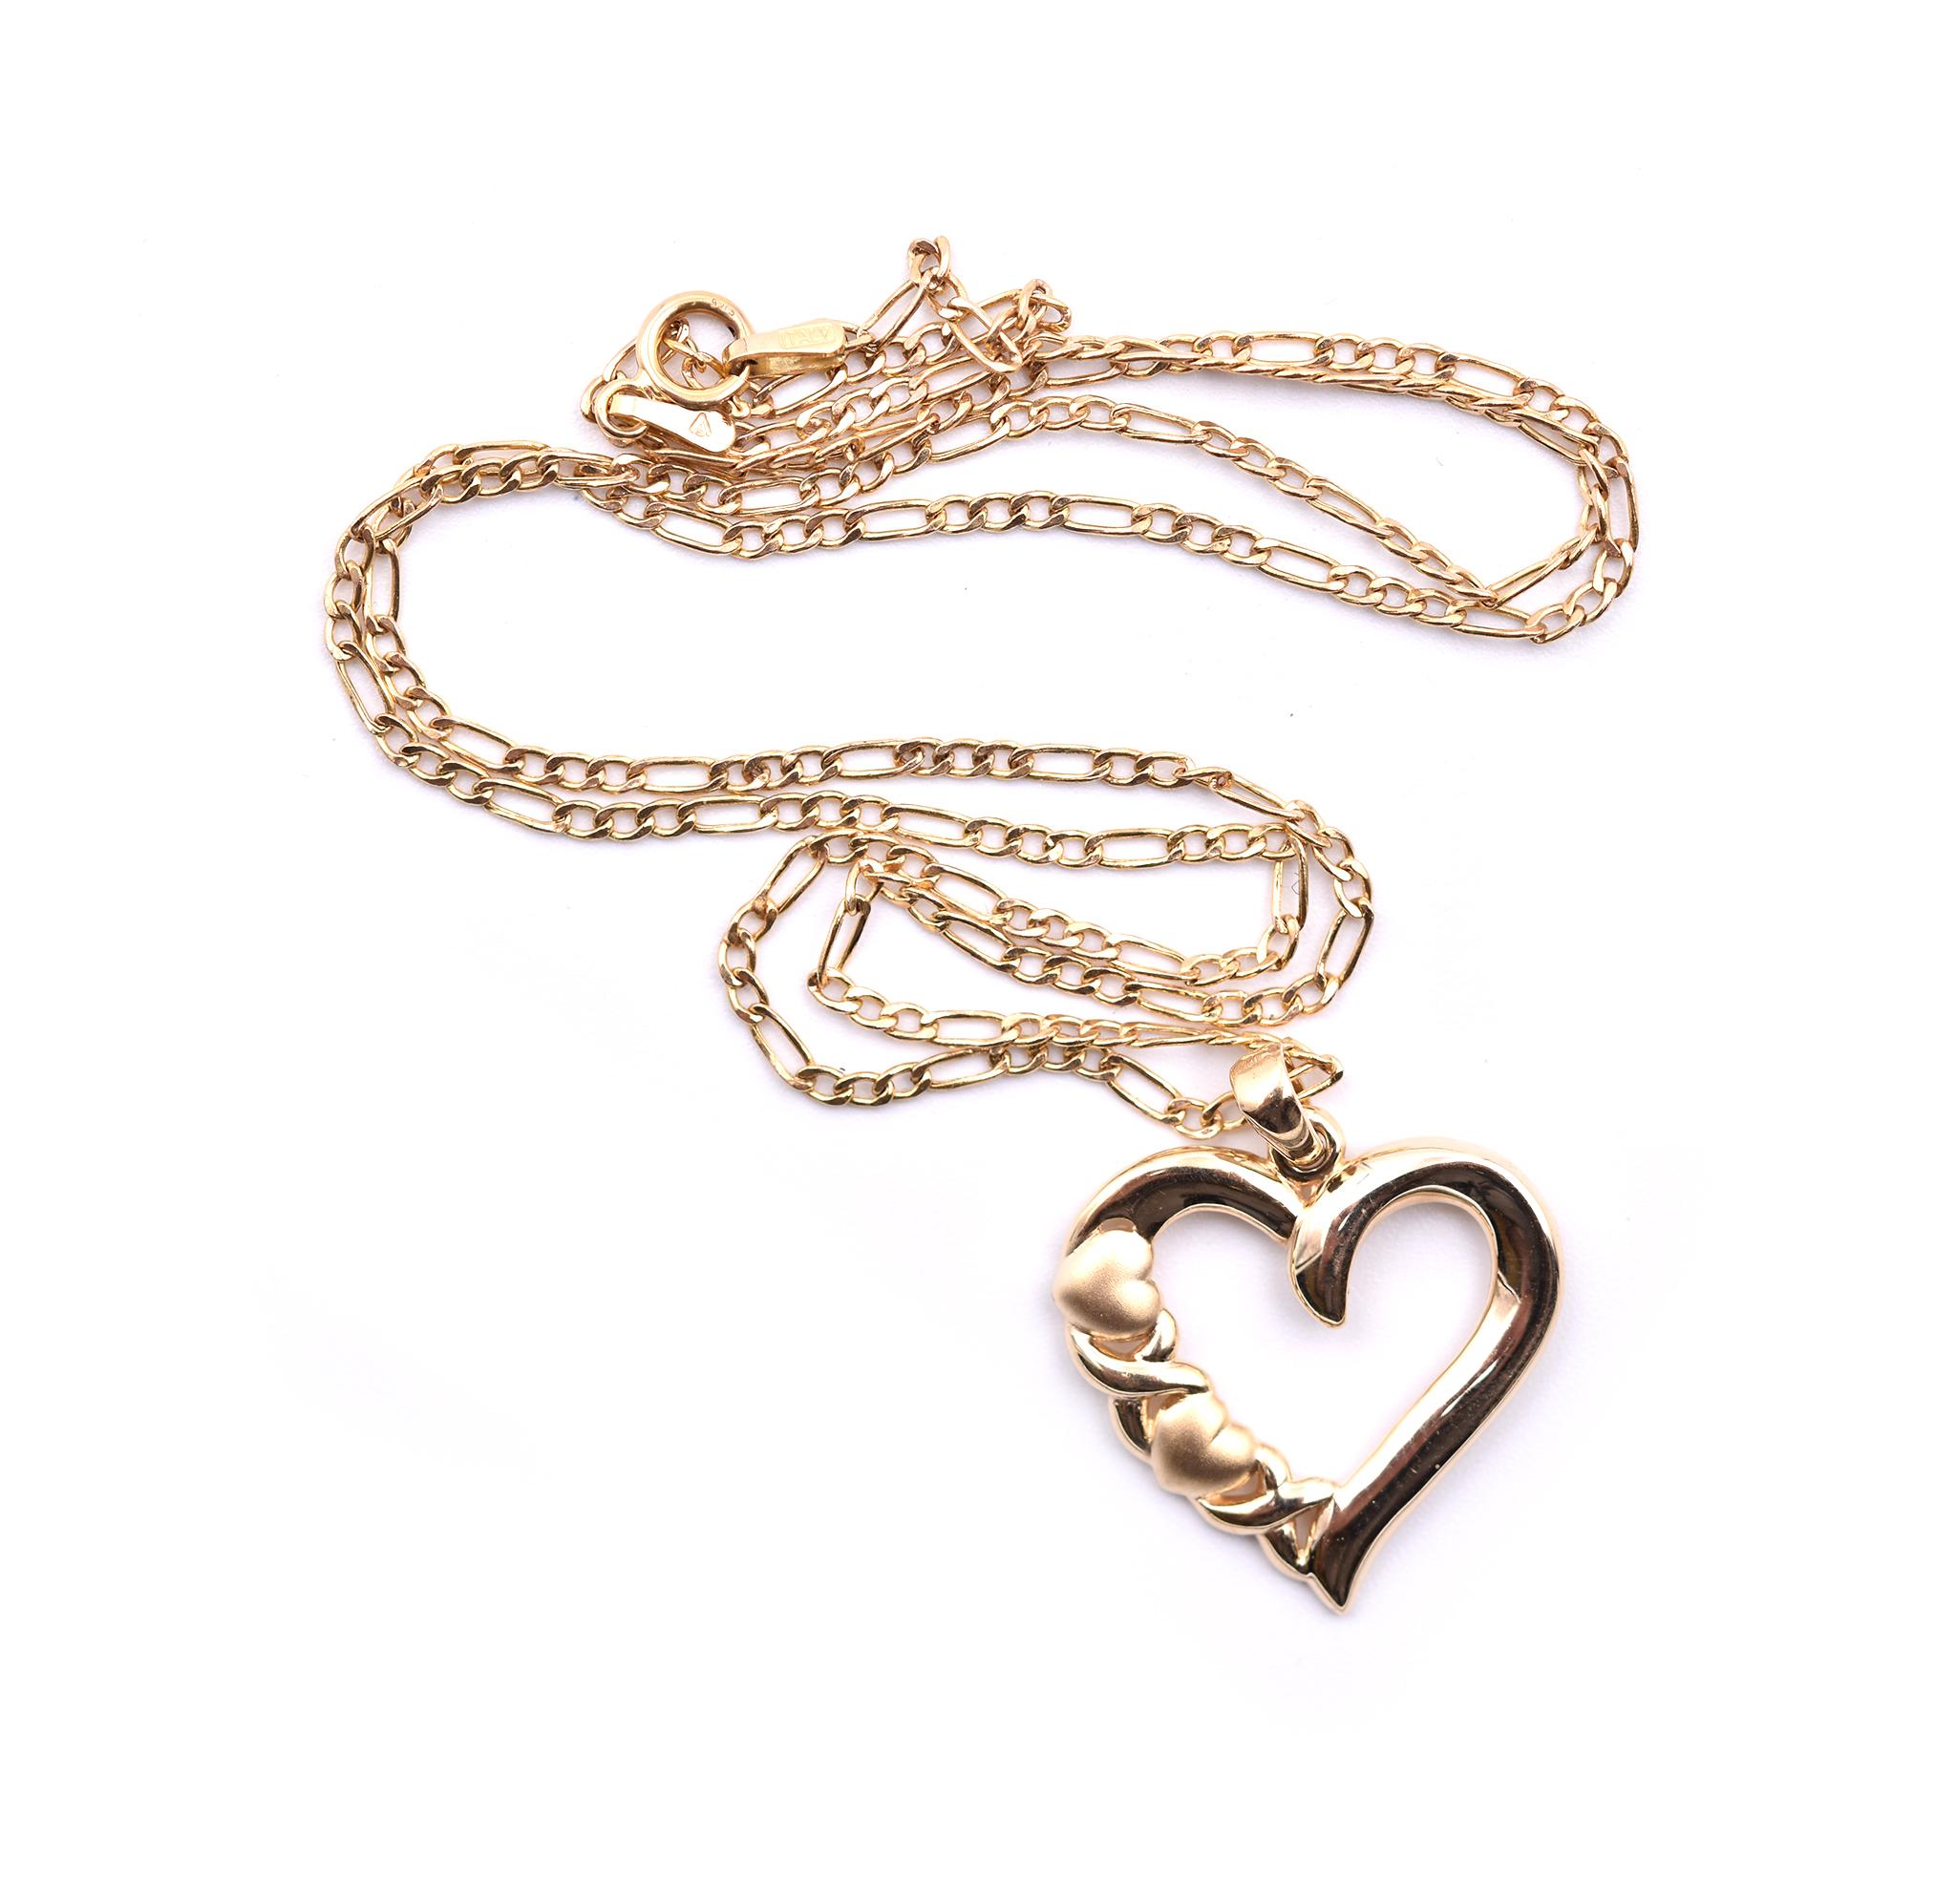 Designer: custom 
Material: 14K yellow gold
Dimensions: the necklace measures 18-inches in length
Weight:  3.06 grams